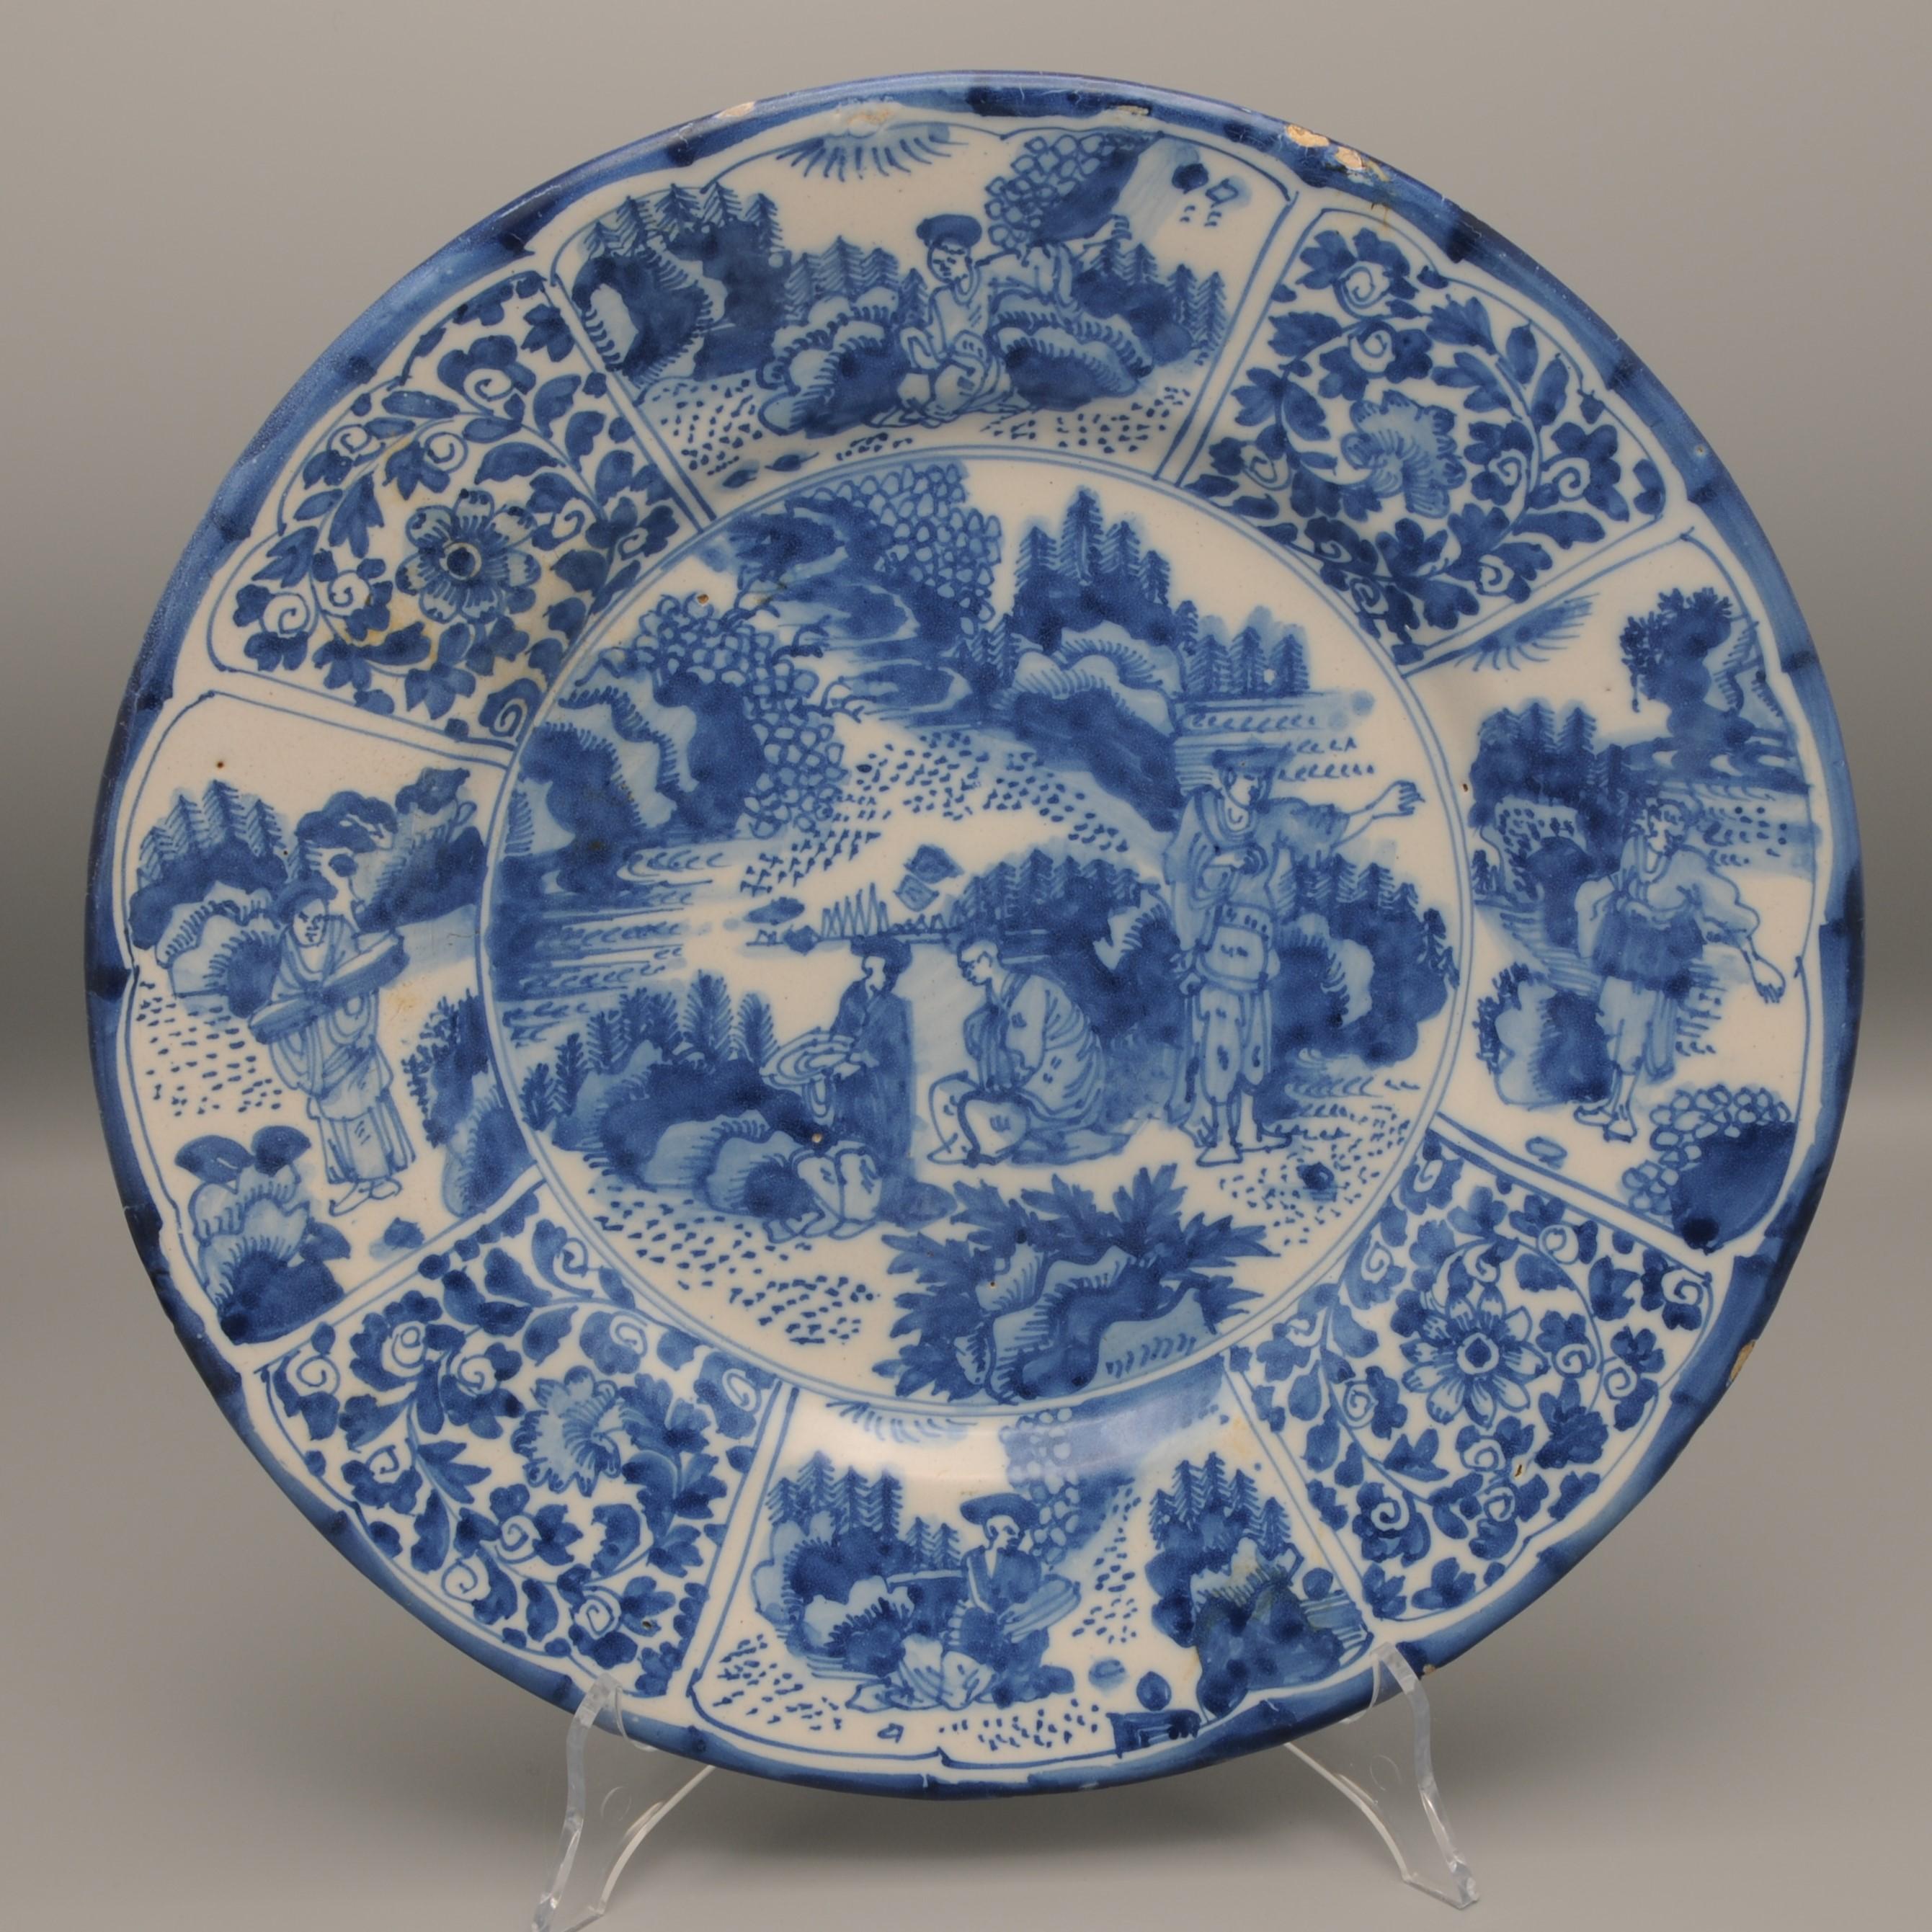 Rare second half 17th century Blue Delftware platter with Chinese kraak style decoration of a garden with 3 Chinese persons. Border decoration in panels. Flower vines in four small panels, seated figures in a landscape in two large panels and two